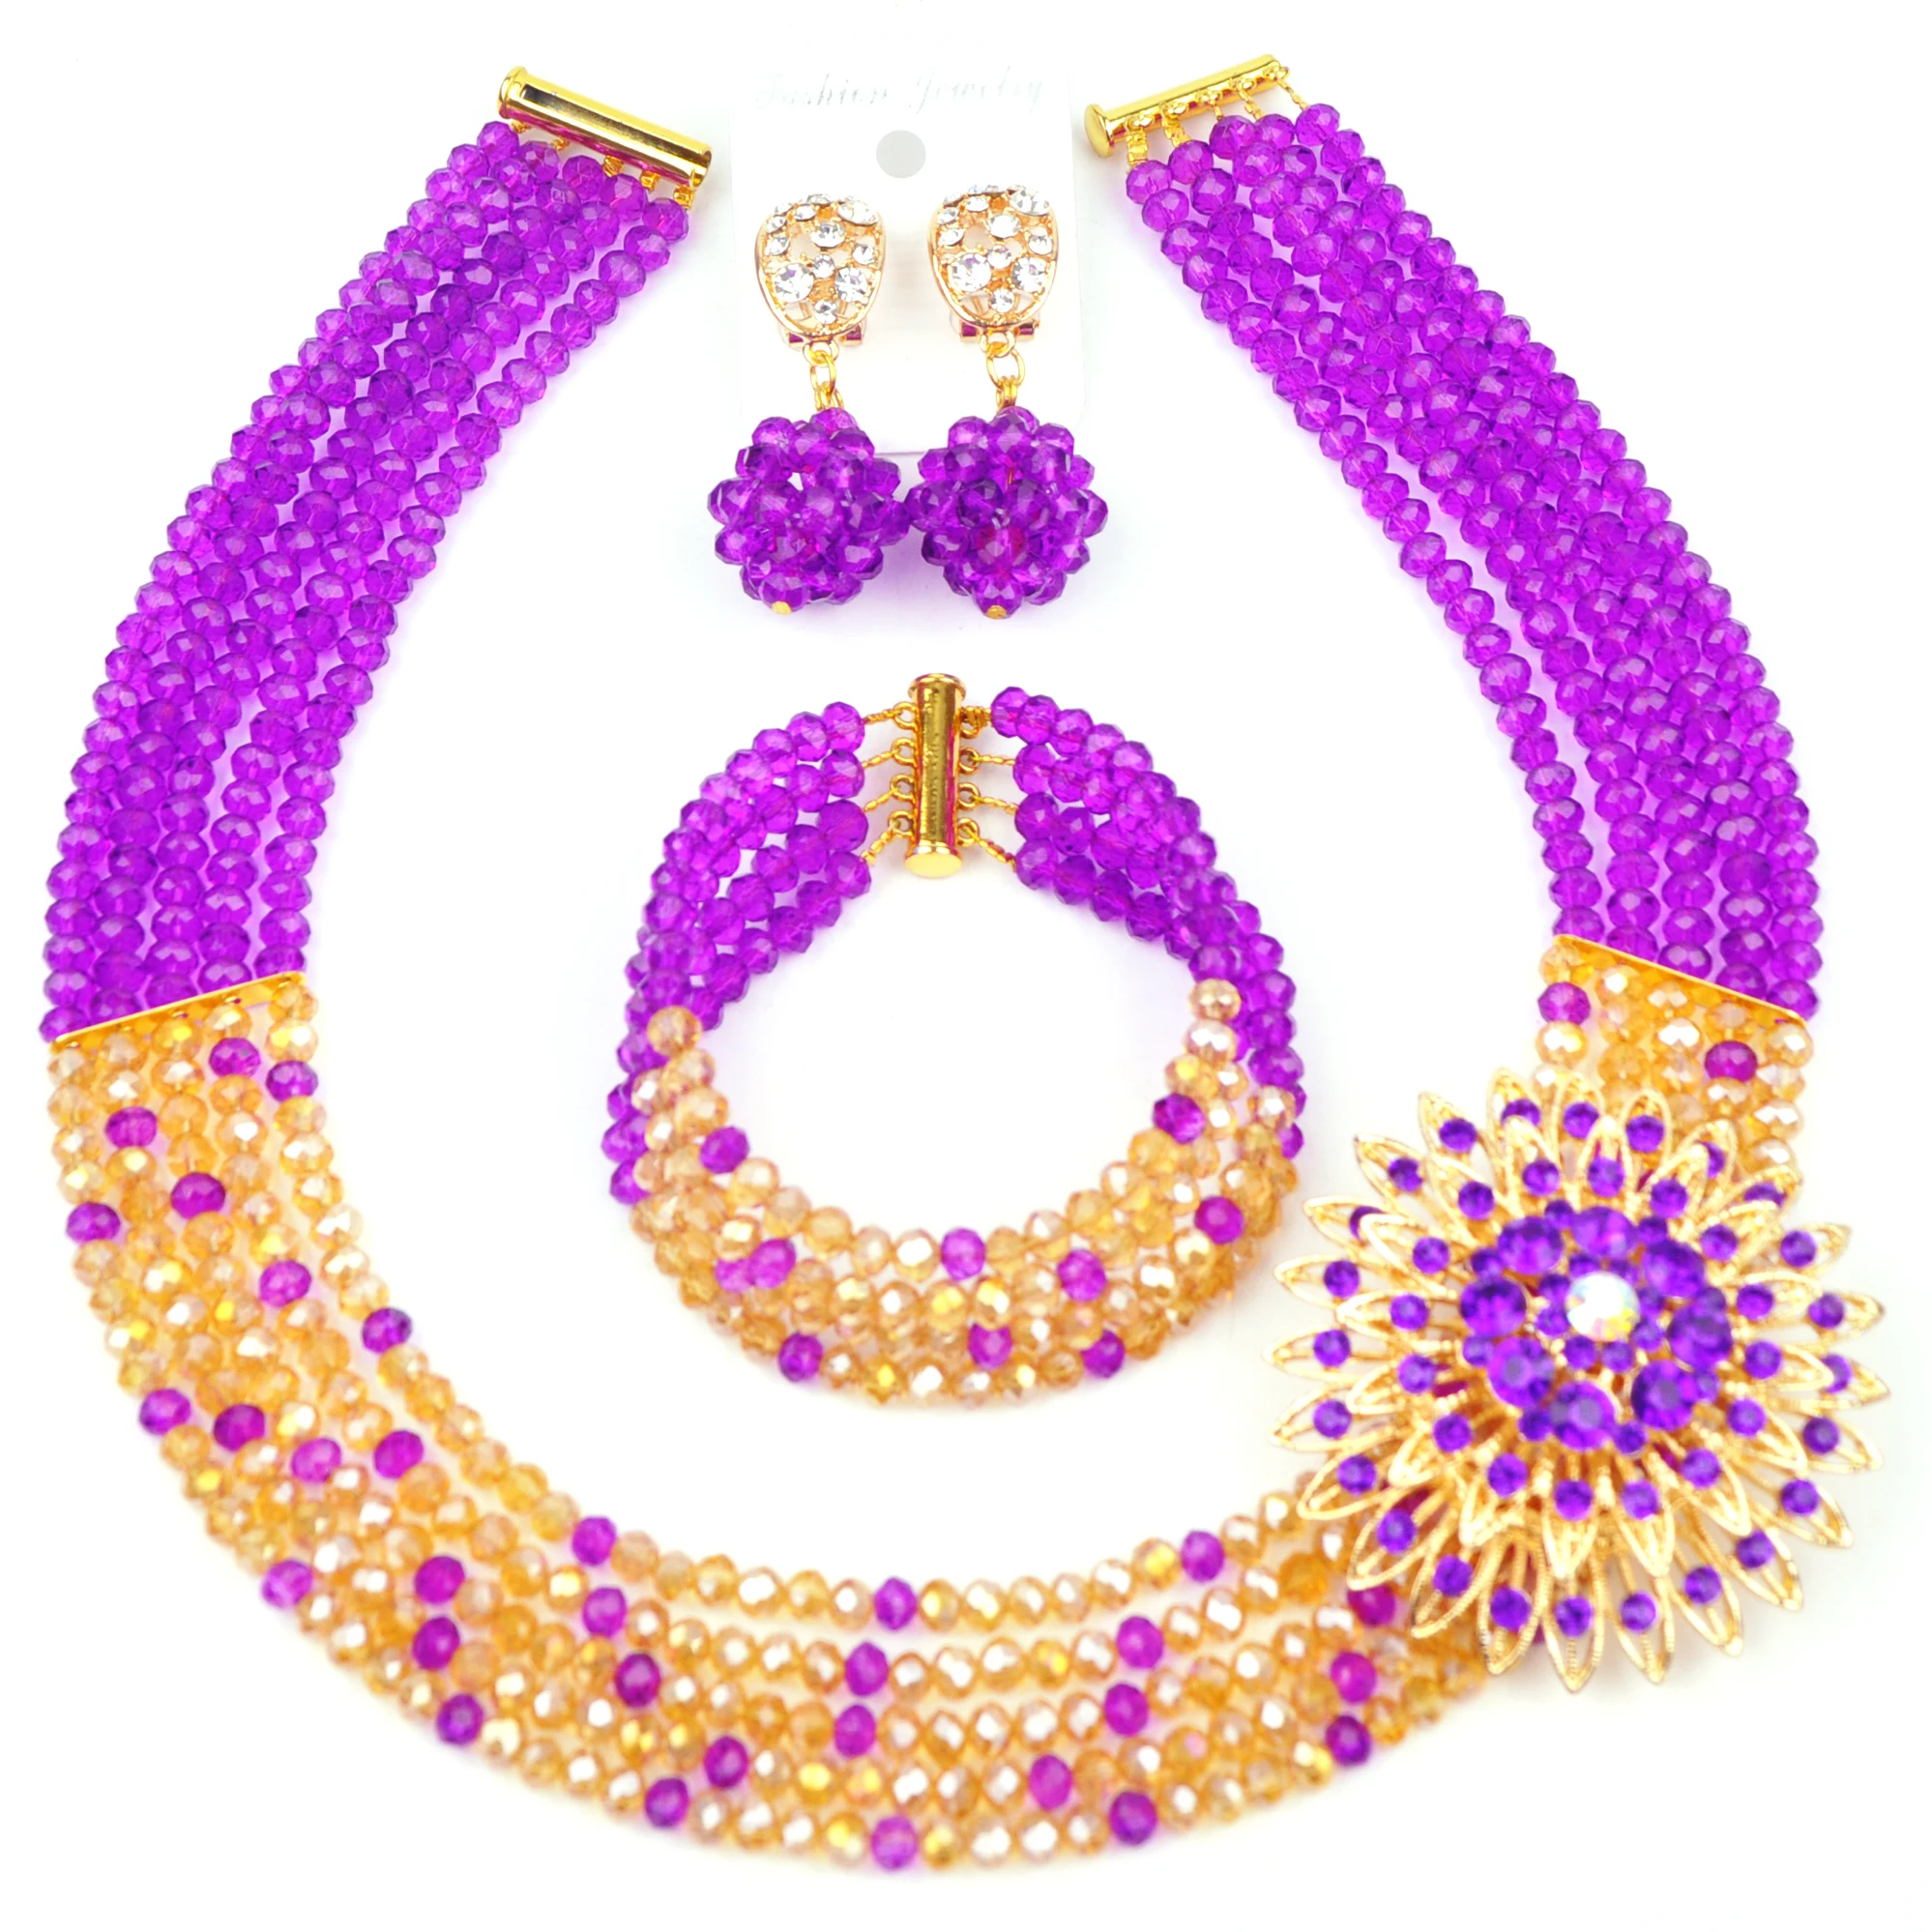 

Purple and Champagne Gold Crystal Bead Nigerian Wedding Bridal Jewelry Sets